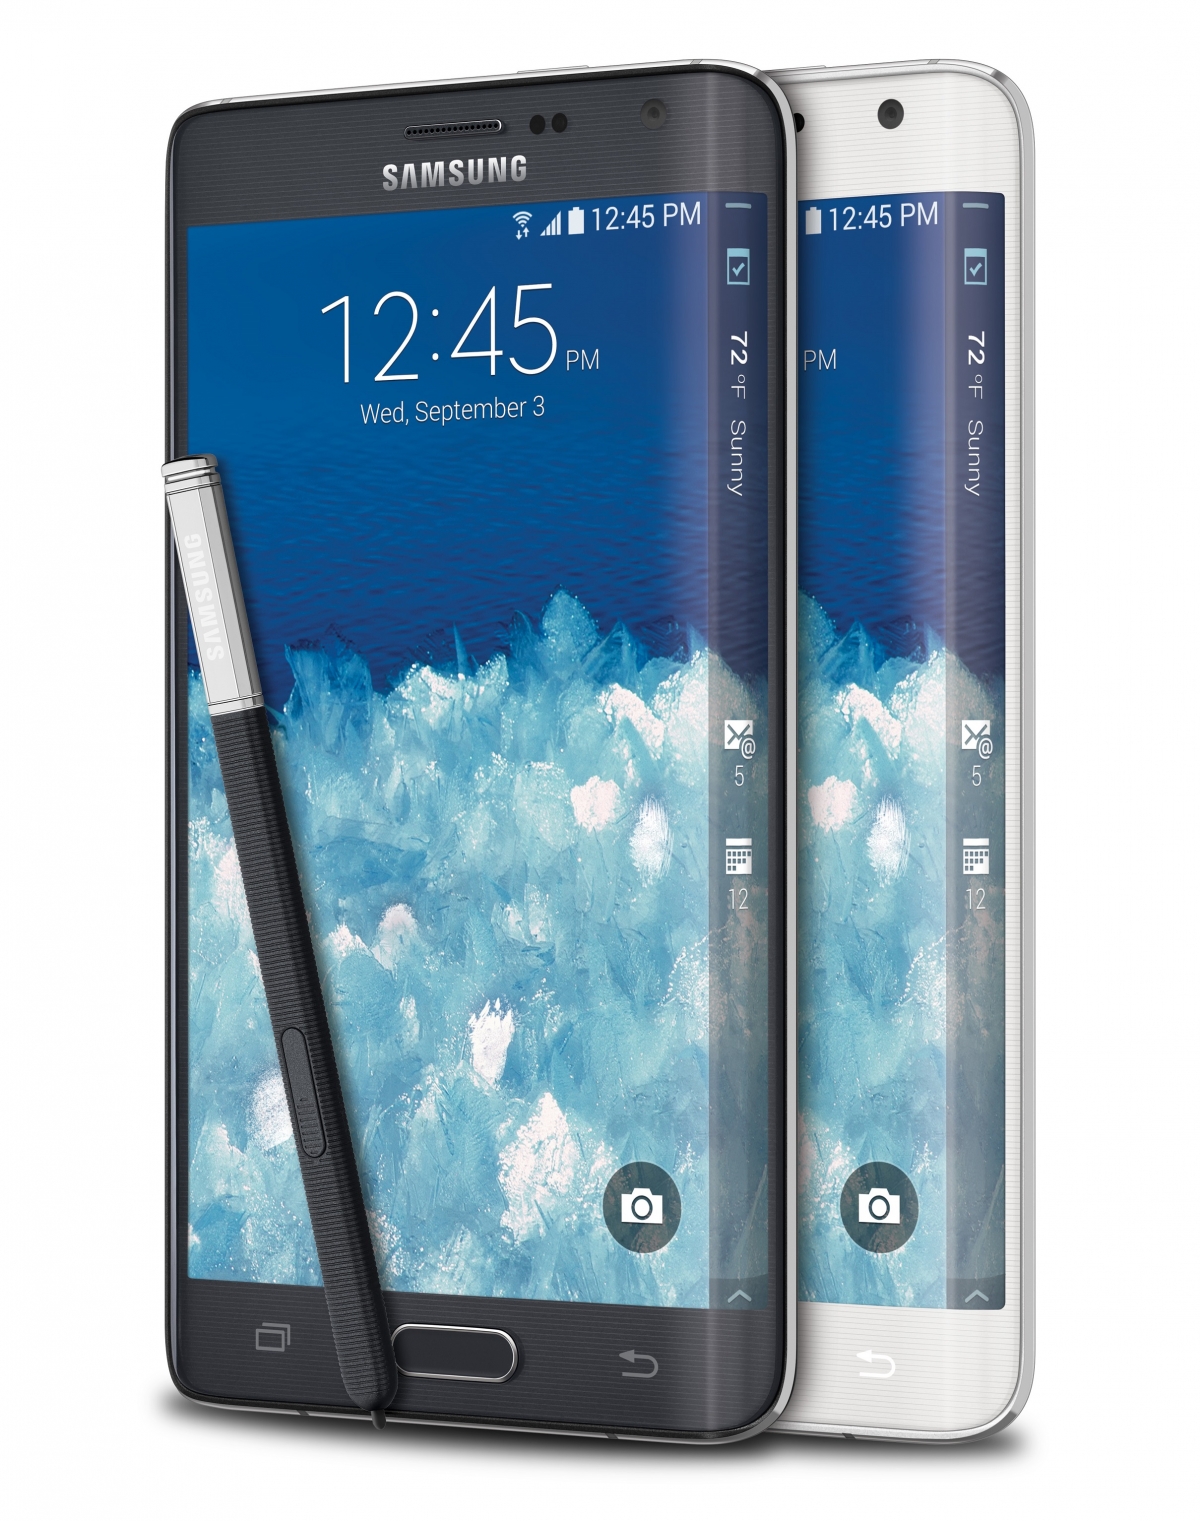 MOBILE PRICE IN PAKISTAN AND EDUCATION UPDATE NEWS: Samsung Galaxy Note